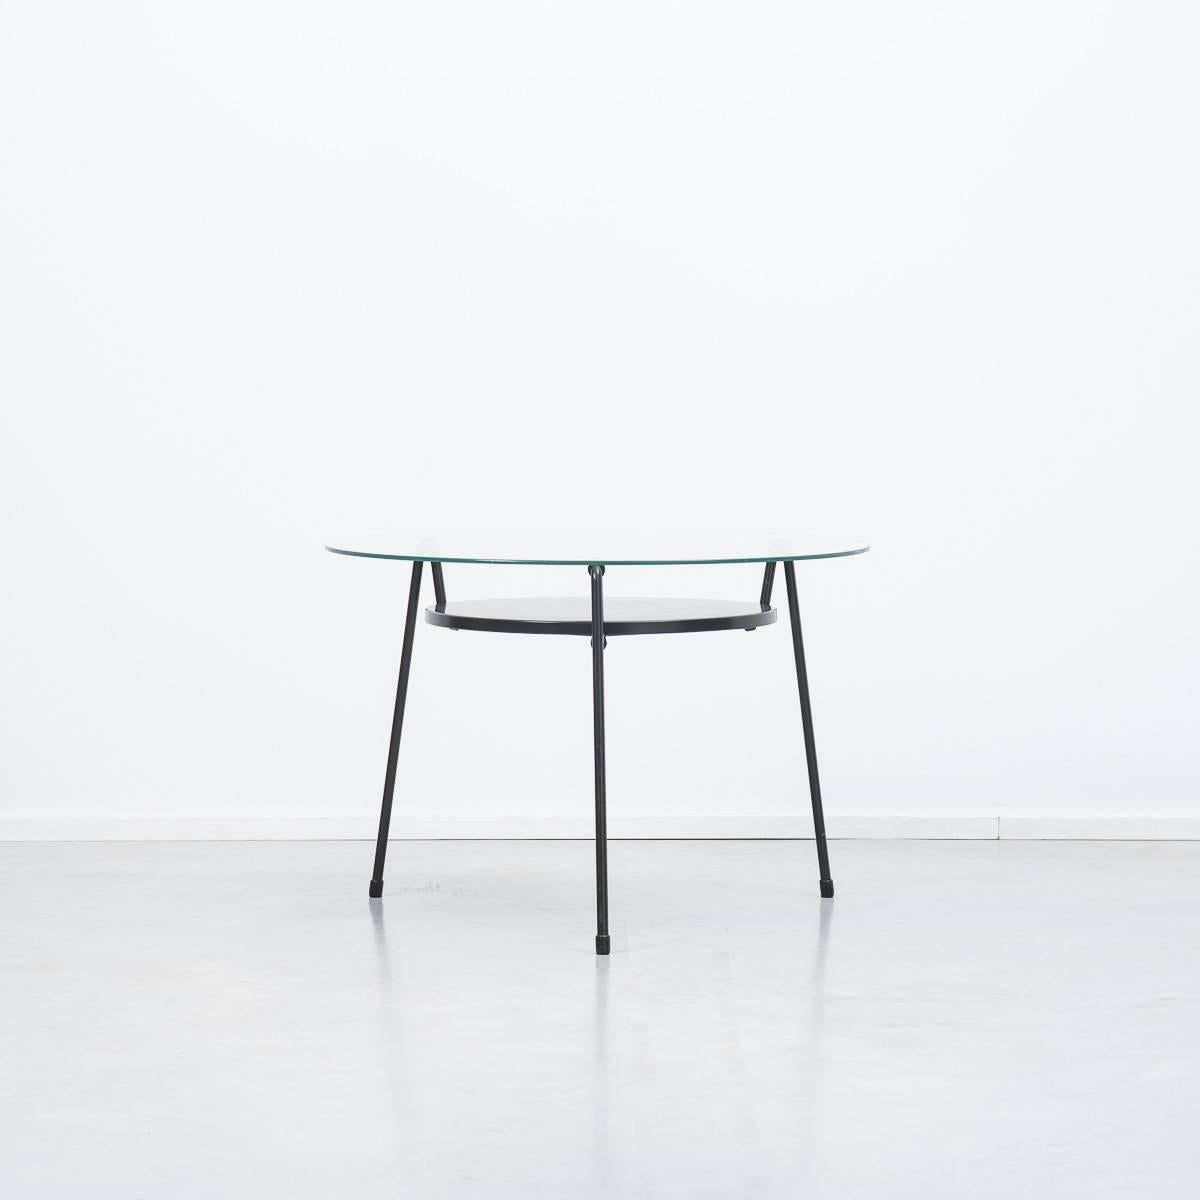 The ‘Mug’ coffee table, translating as ‘Mosquito’ was designed by Wim Rietveld, son of the famous Bauhaus designer, Gerrit Rietveld. Great example of Dutch Industrial design.

Black metal shelf, black frame, original glass top.